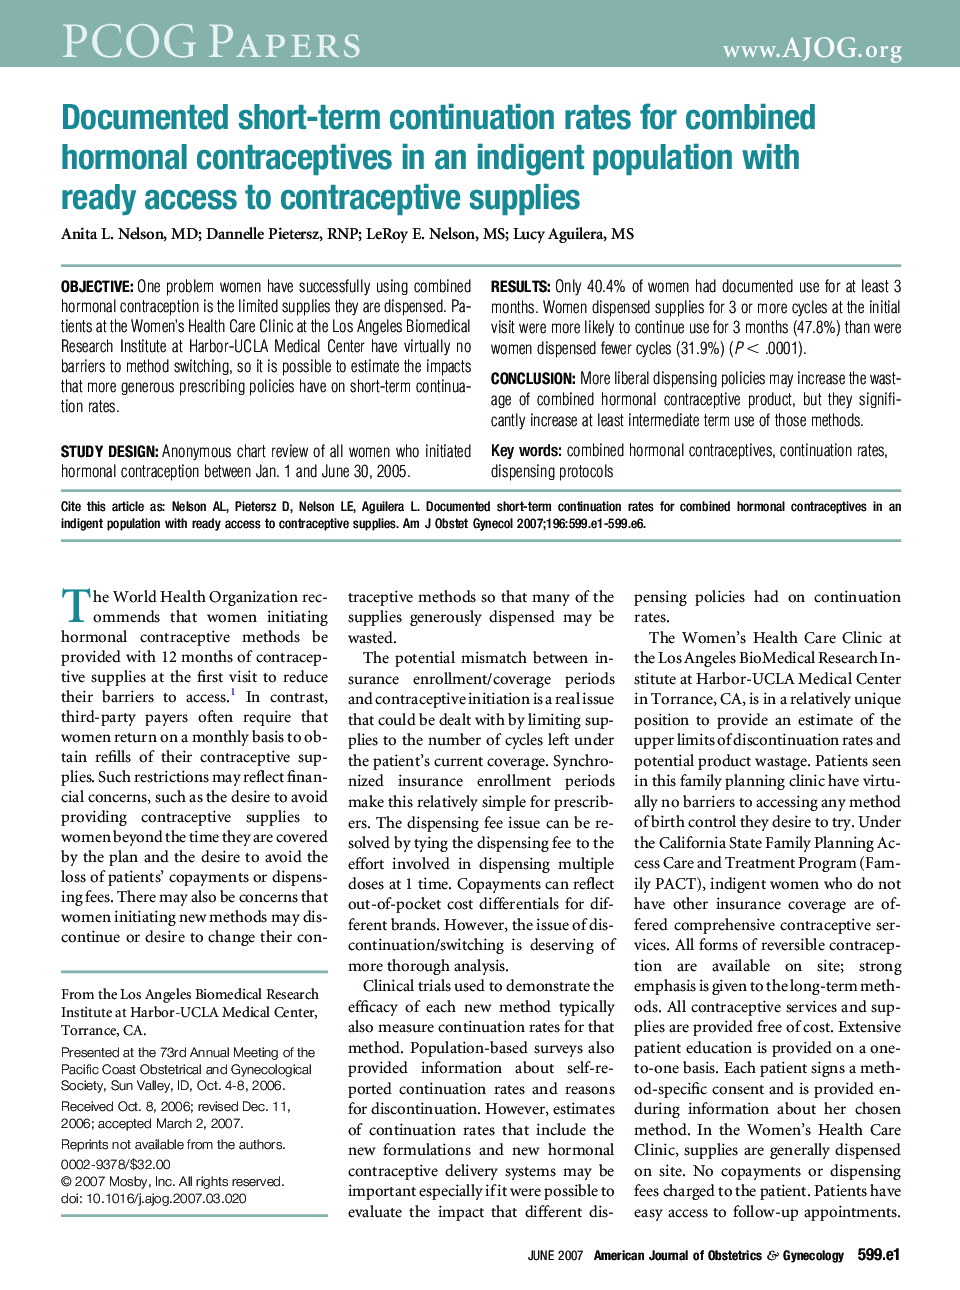 Documented short-term continuation rates for combined hormonal contraceptives in an indigent population with ready access to contraceptive supplies